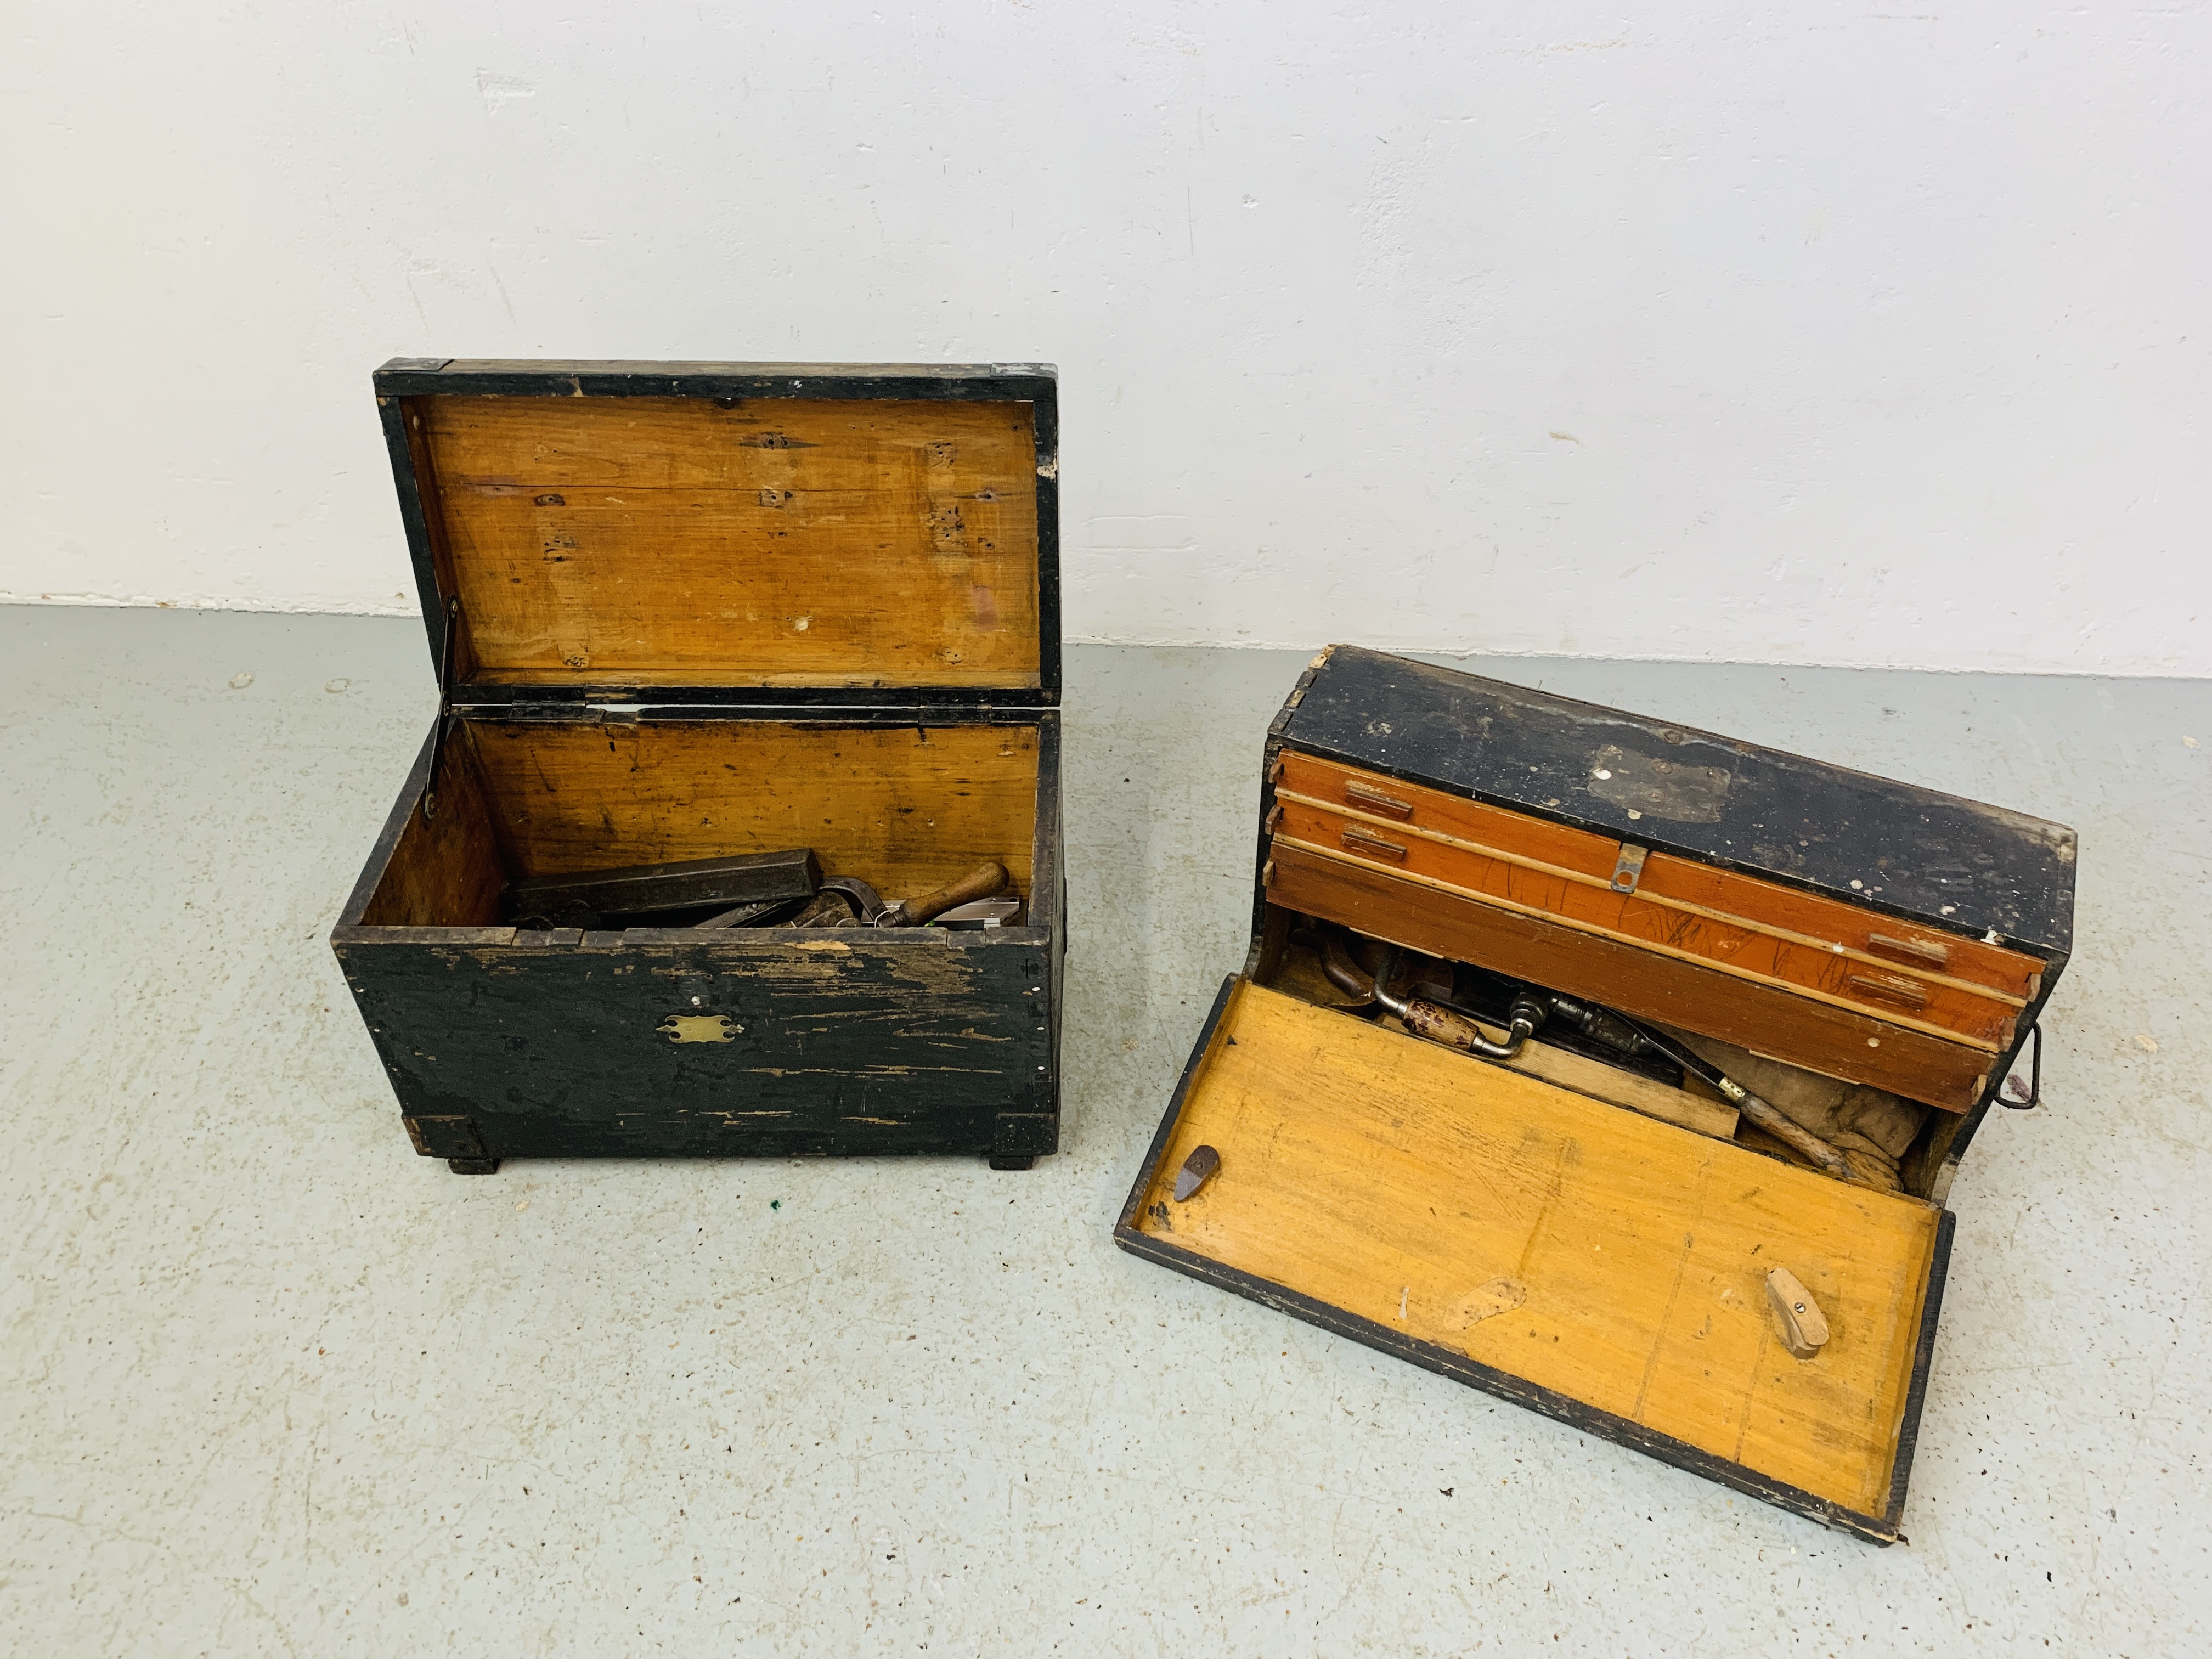 2 WOODEN CARPENTRY BOXES CONTAINING VARIOUS HAND TOOLS TO INCLUDE PLANES, FILES, MEASURES ETC.